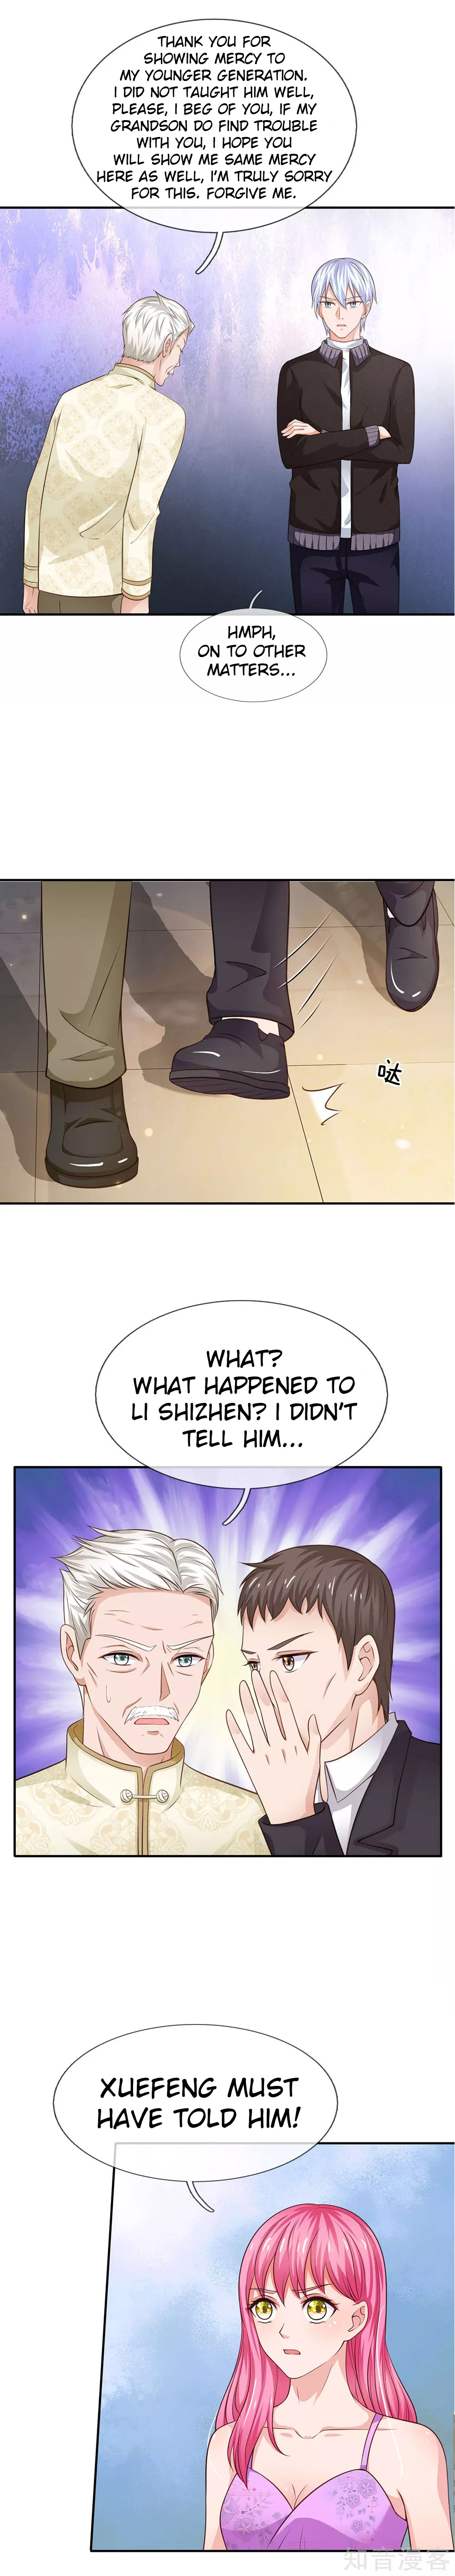 I'm The Great Immortal - Page 2